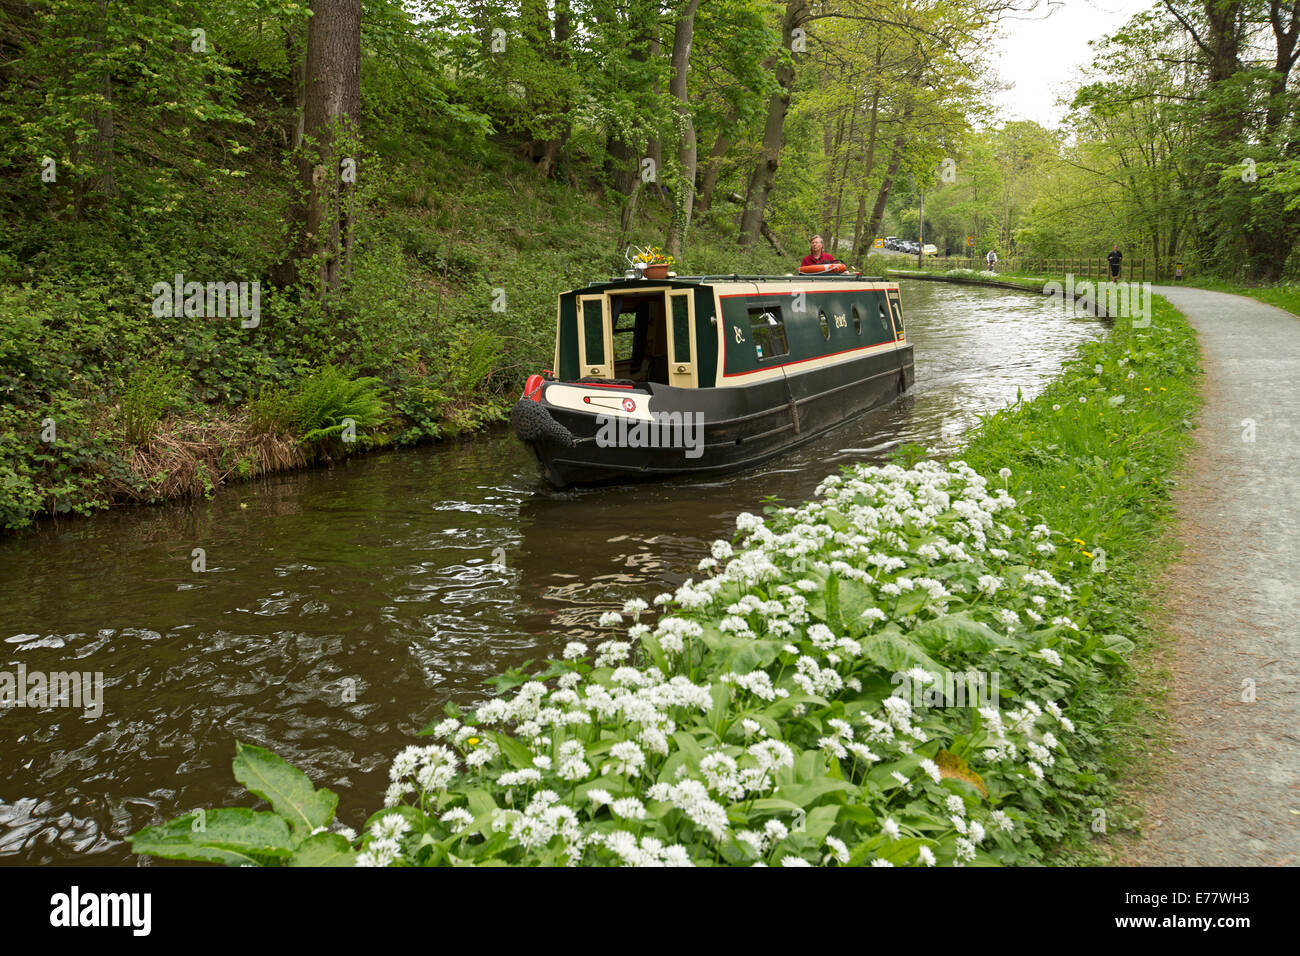 Traditional narrowboat on calm water of Llangollen canal passing woodlands and masses of white wildflowers on bank Stock Photo